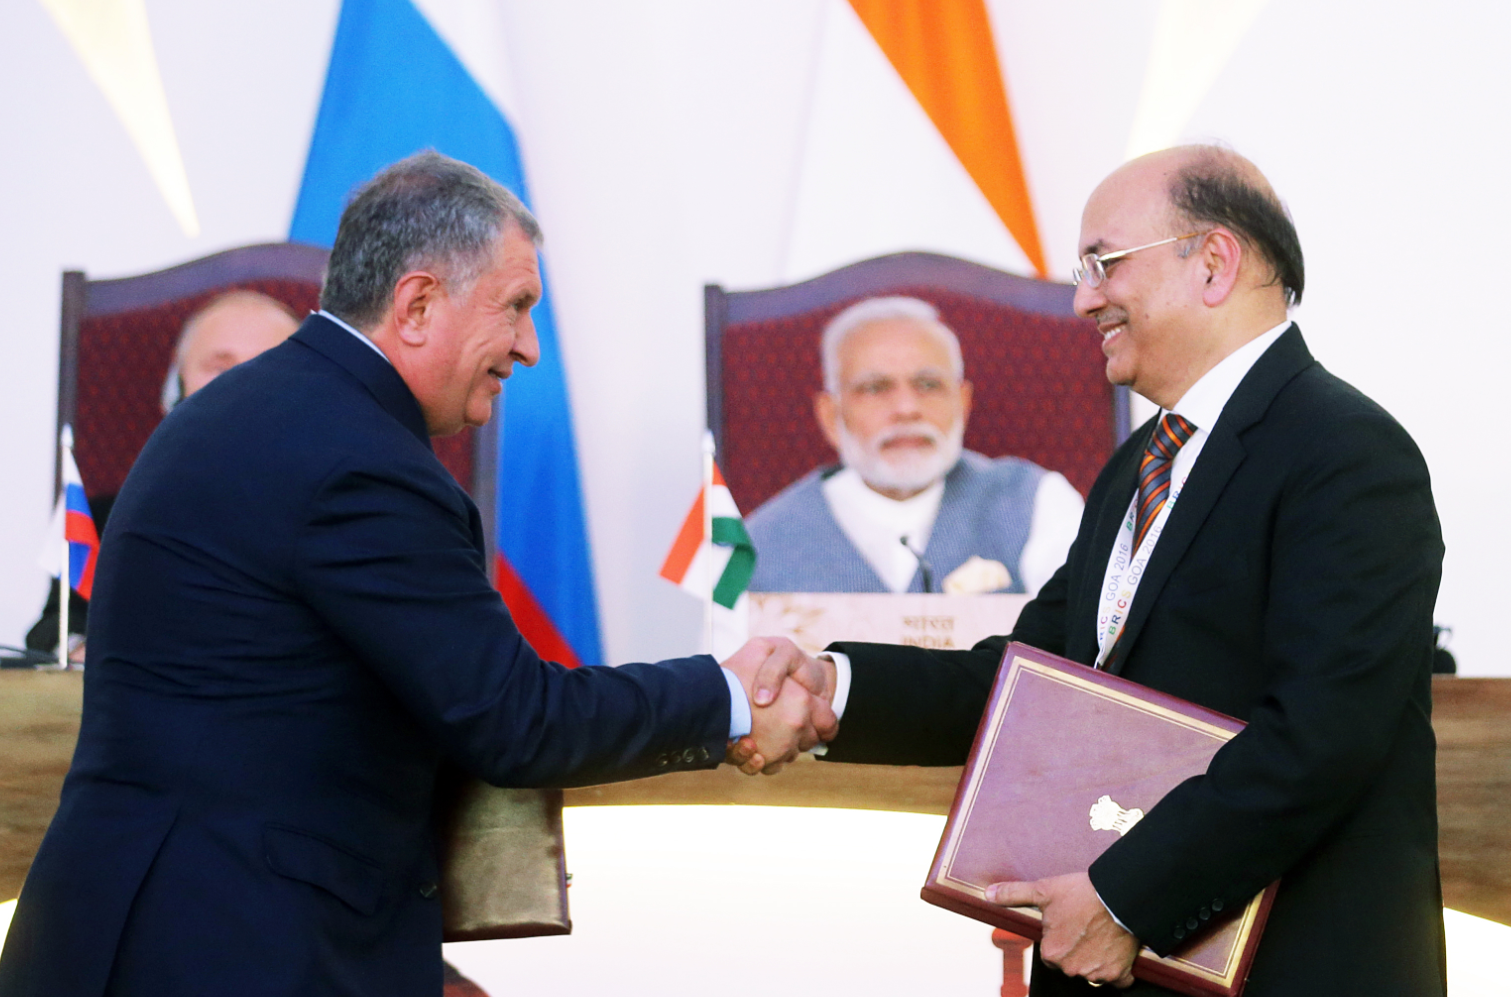 Rosneft oil company CEO Igor Sechin, left, and Narendra Verma, Managing Director of ONGC Videsh Limited, at the ceremony of signing documents attended by Russian President Vladimir Putin and Indian Prime Minister Narendra Modi in Goa, India, Oct. 15, 2016.